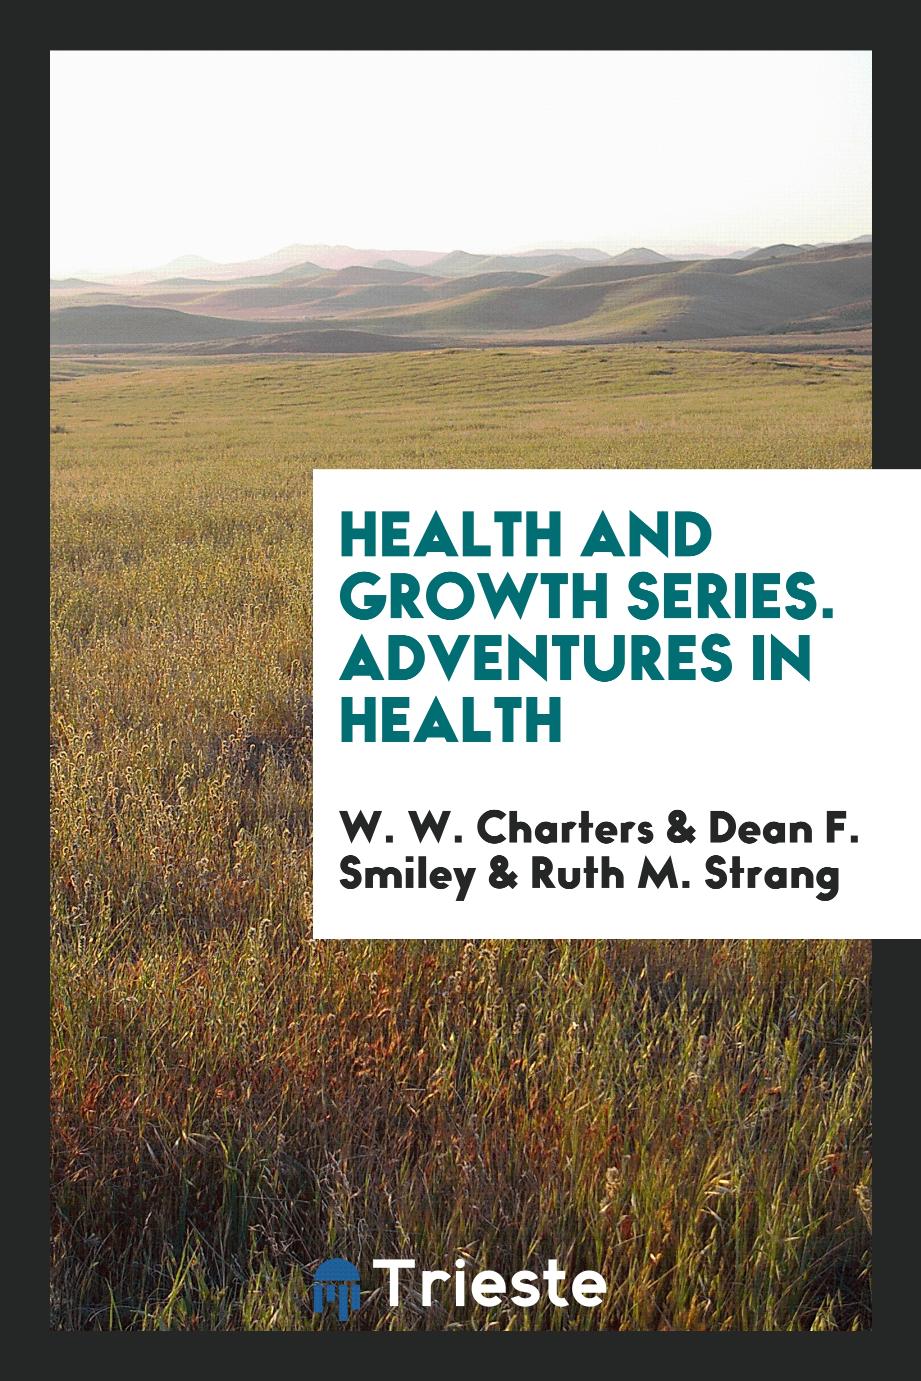 Health and growth series. Adventures in health